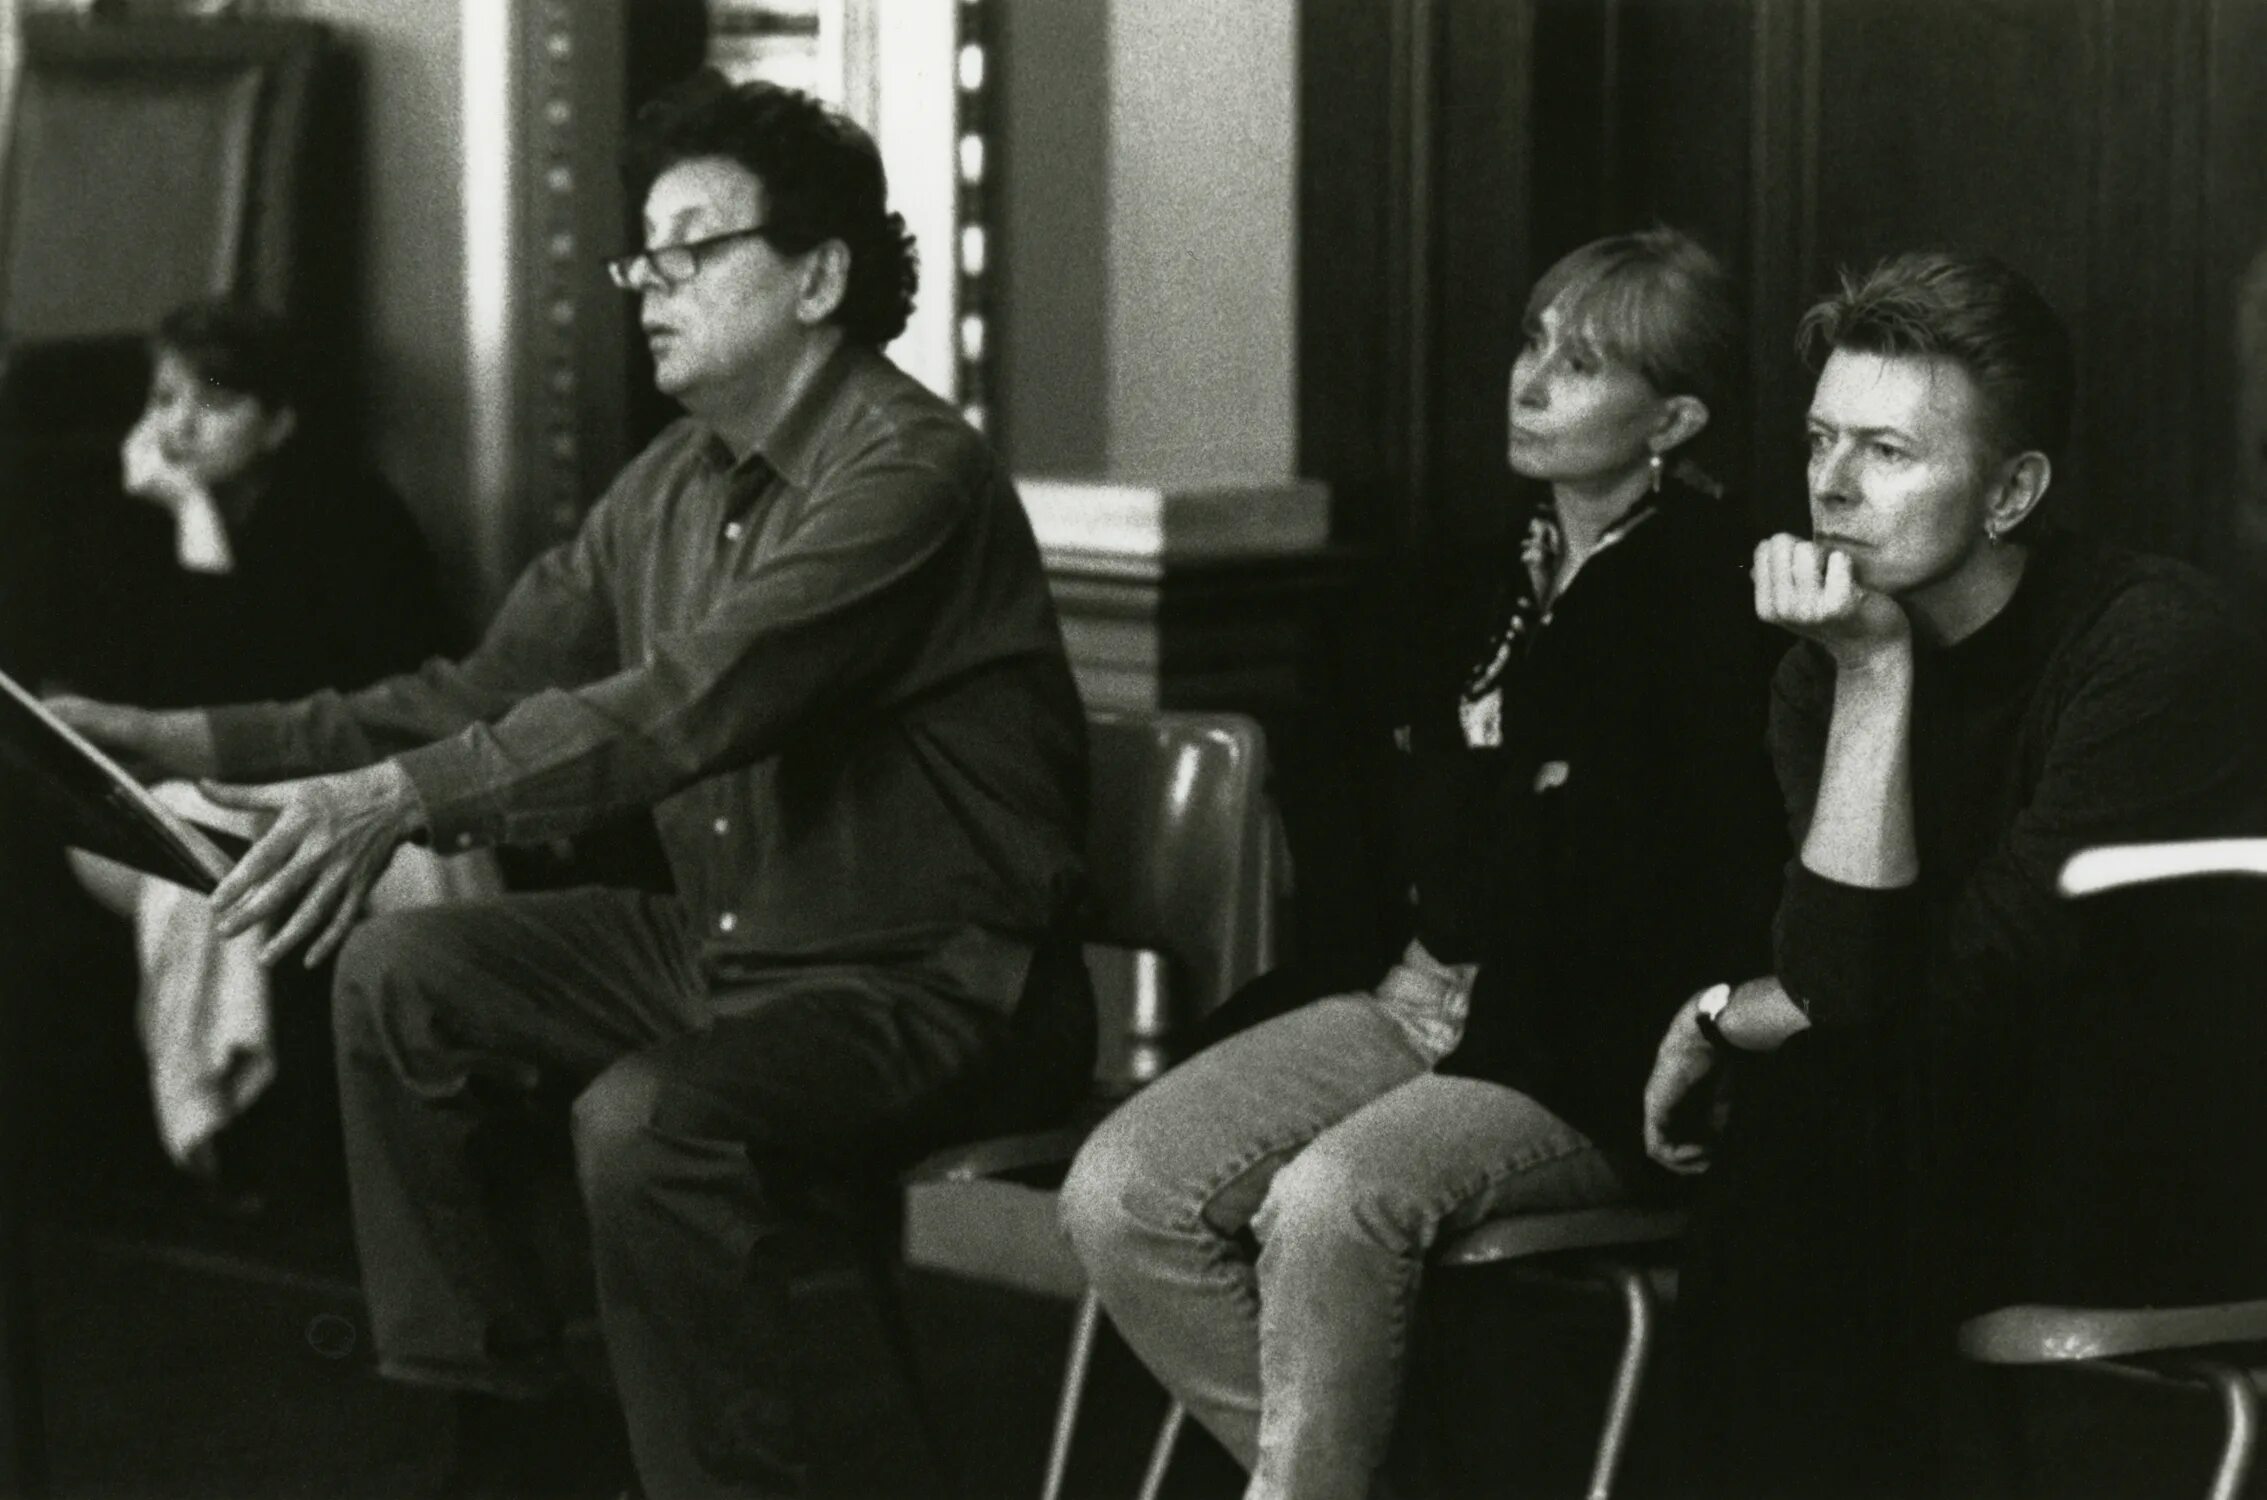 Glass heroes. David Bowie Rehearsal. Philip Glass "dancepieces".